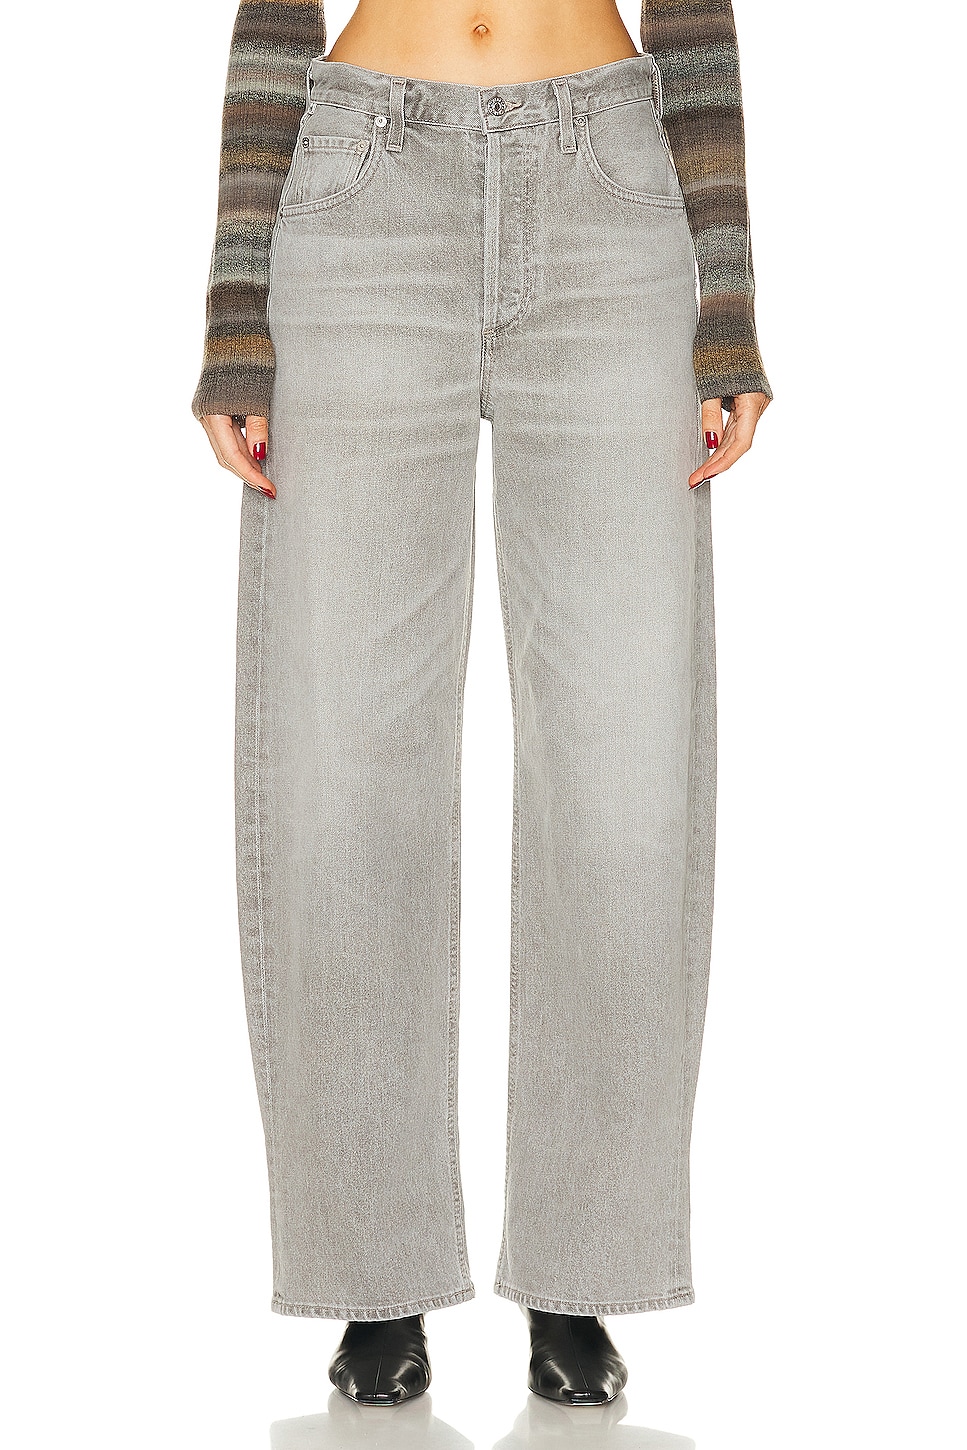 Image 1 of Citizens of Humanity Ayla Baggy Cuffed Crop in Quartz Grey